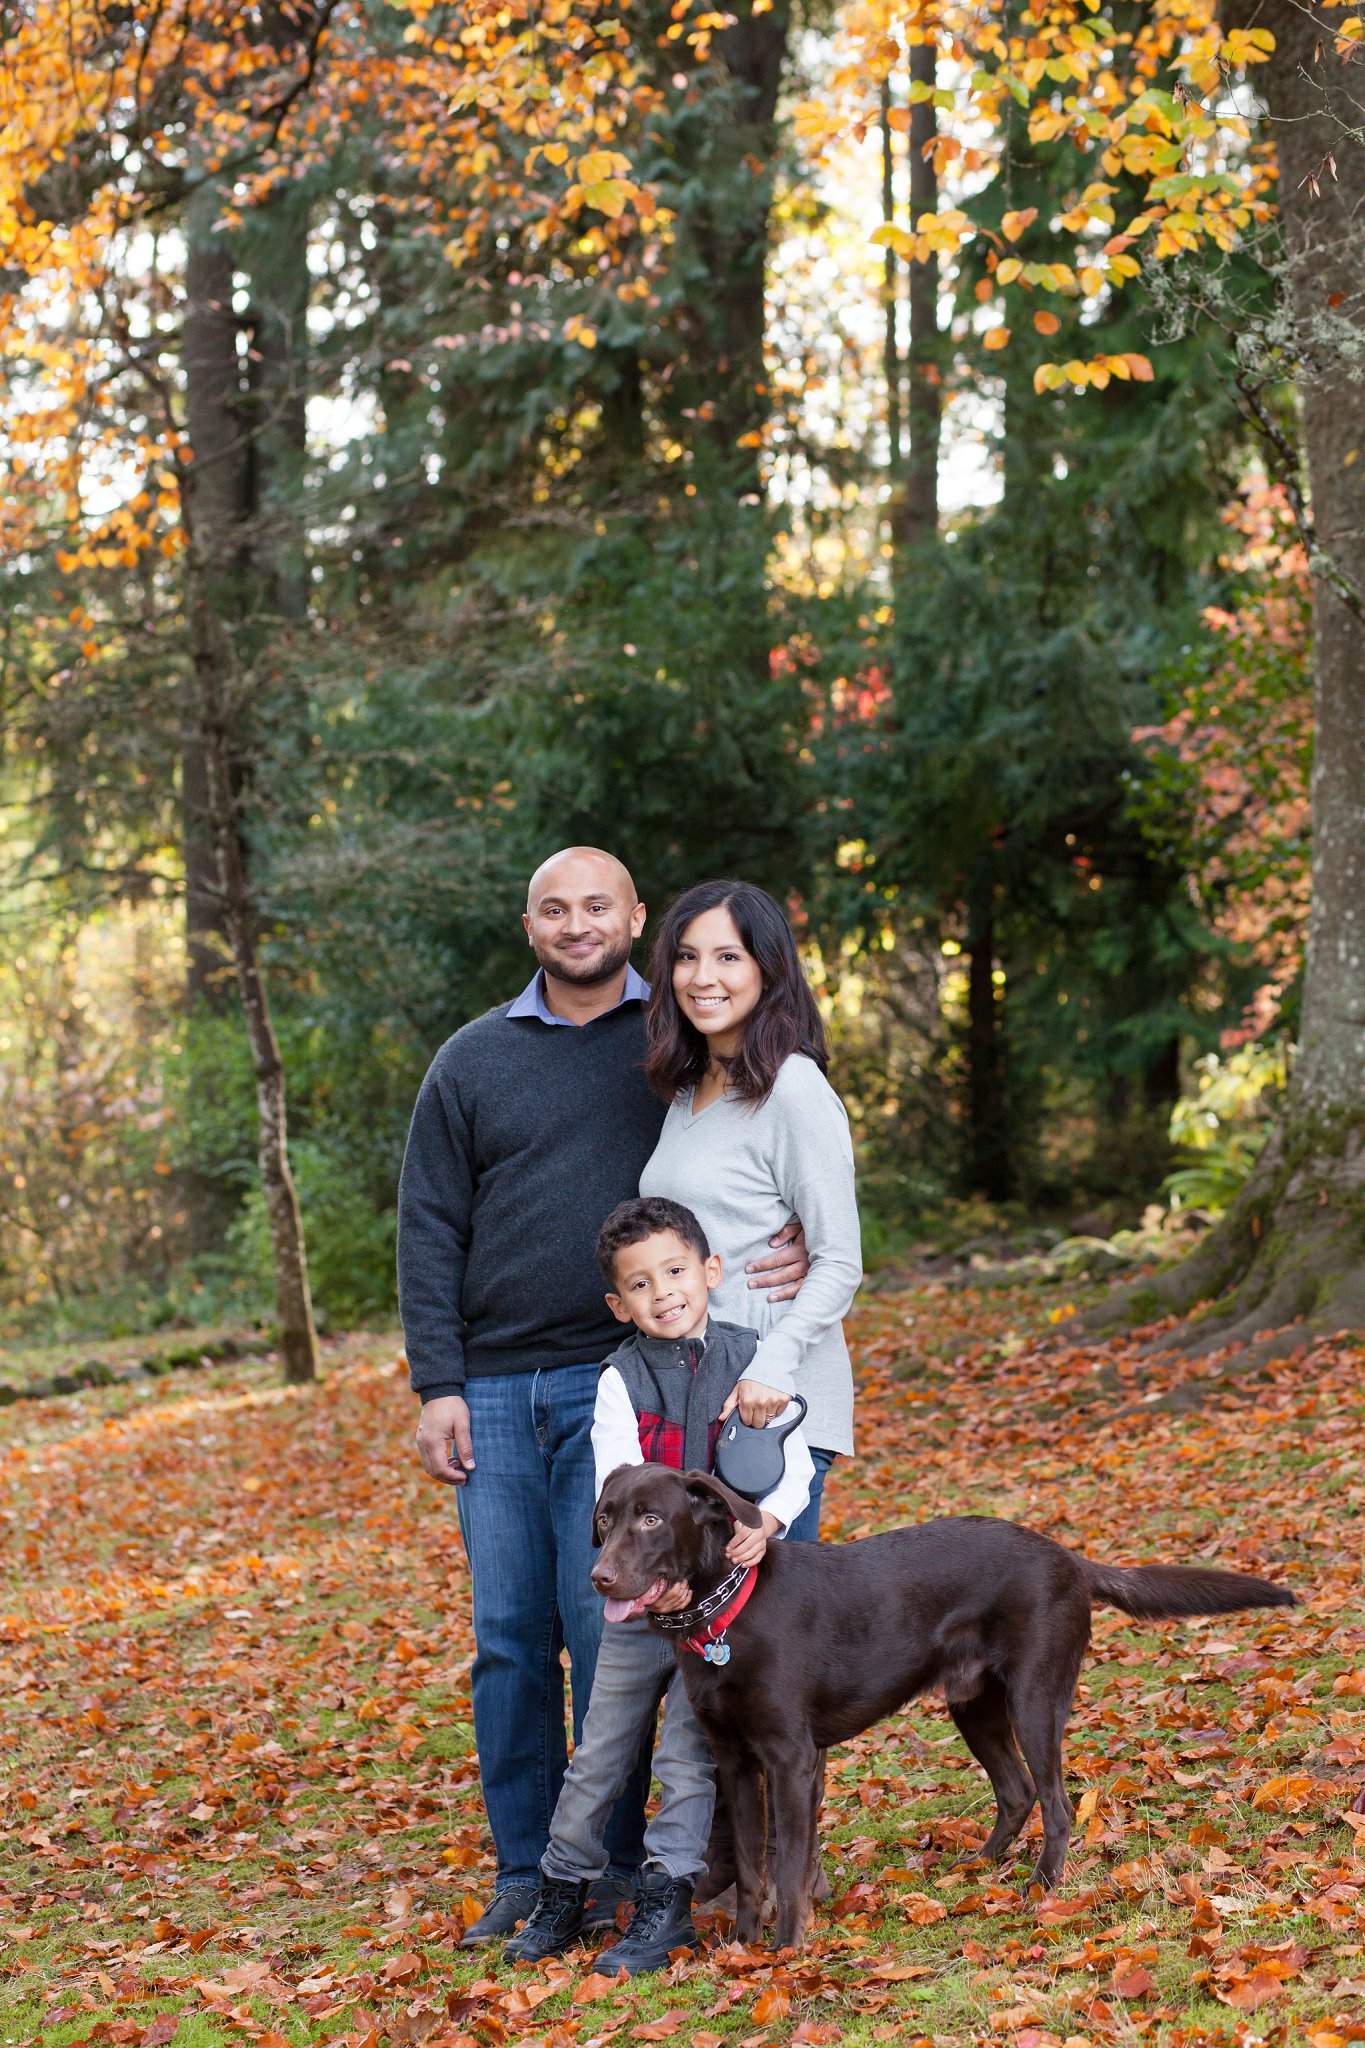 Jenkins Estate fall Family Photo Session with a dog | Hillsboro, OR Family Photographer